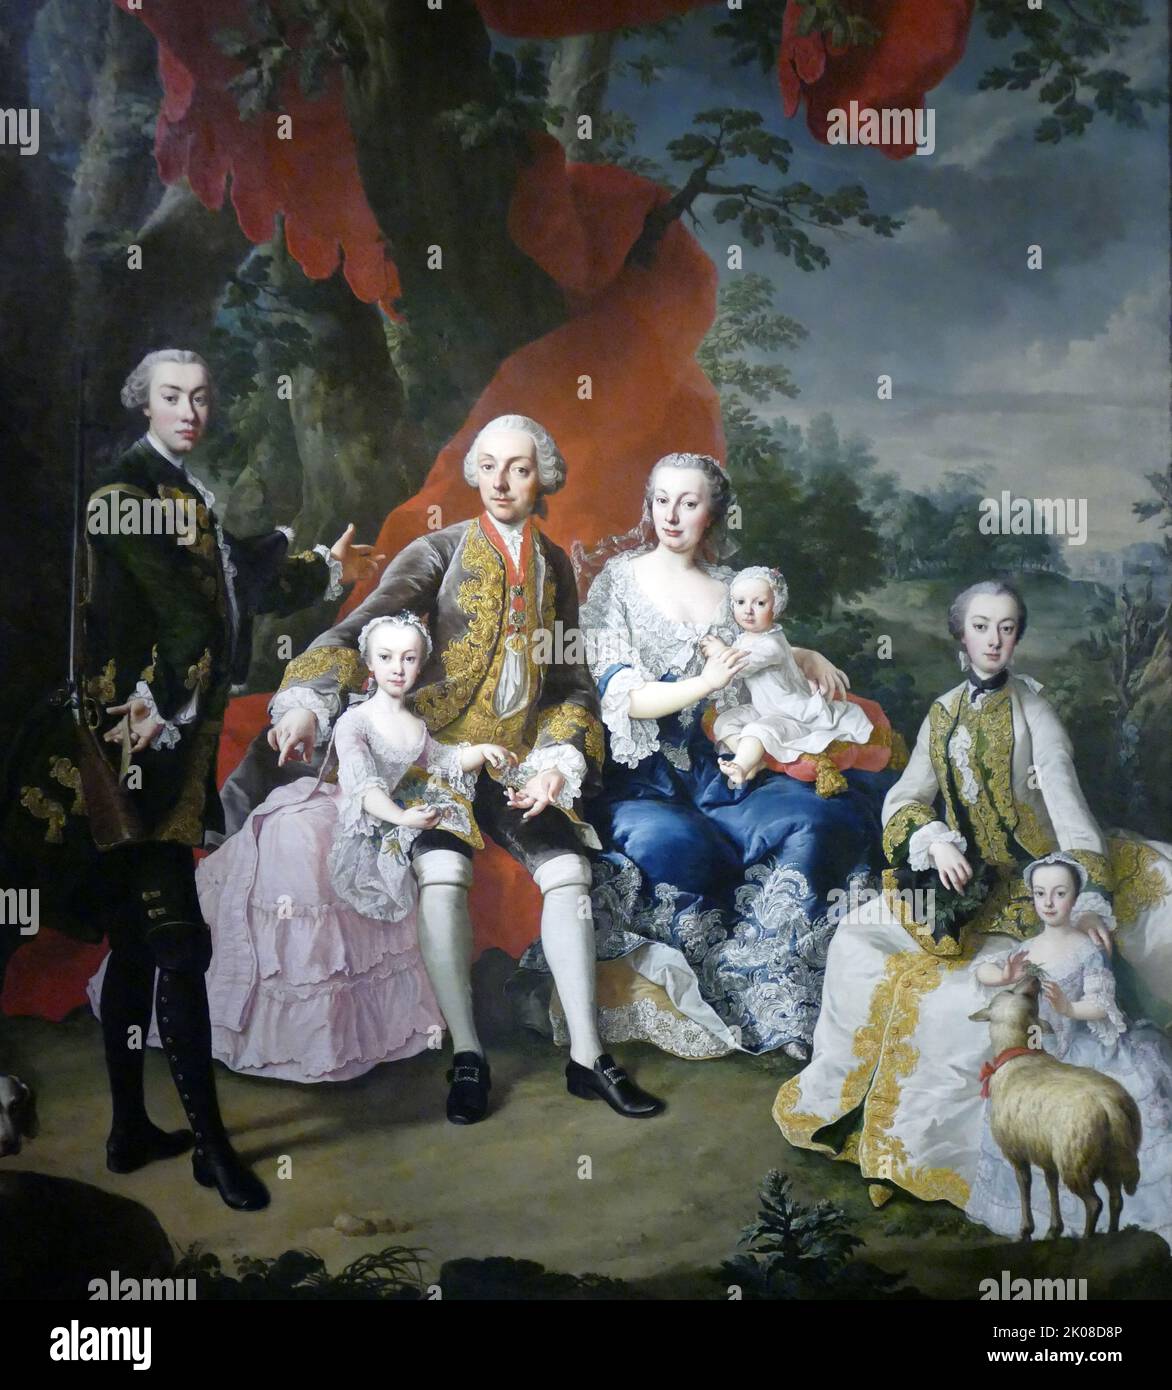 The Family of Count Nikolaus Palffy von Erdod, c1760, by Martin van Meytens (24 June 1695 - 23 March 1770) was a Swedish-Austrian painter who painted members of the Royal Court of Austria such as Marie Antoinette, Maria Theresa of Austria, Francis I, Holy Roman Emperor, the Emperor's family and members of the local aristocracy. Nikolaus VI Graf Palffy von Erdod (1 March 1657 - 20 February 1732) was a Hungarian nobleman, Imperial Field marshal and Palatine of Hungary Stock Photo